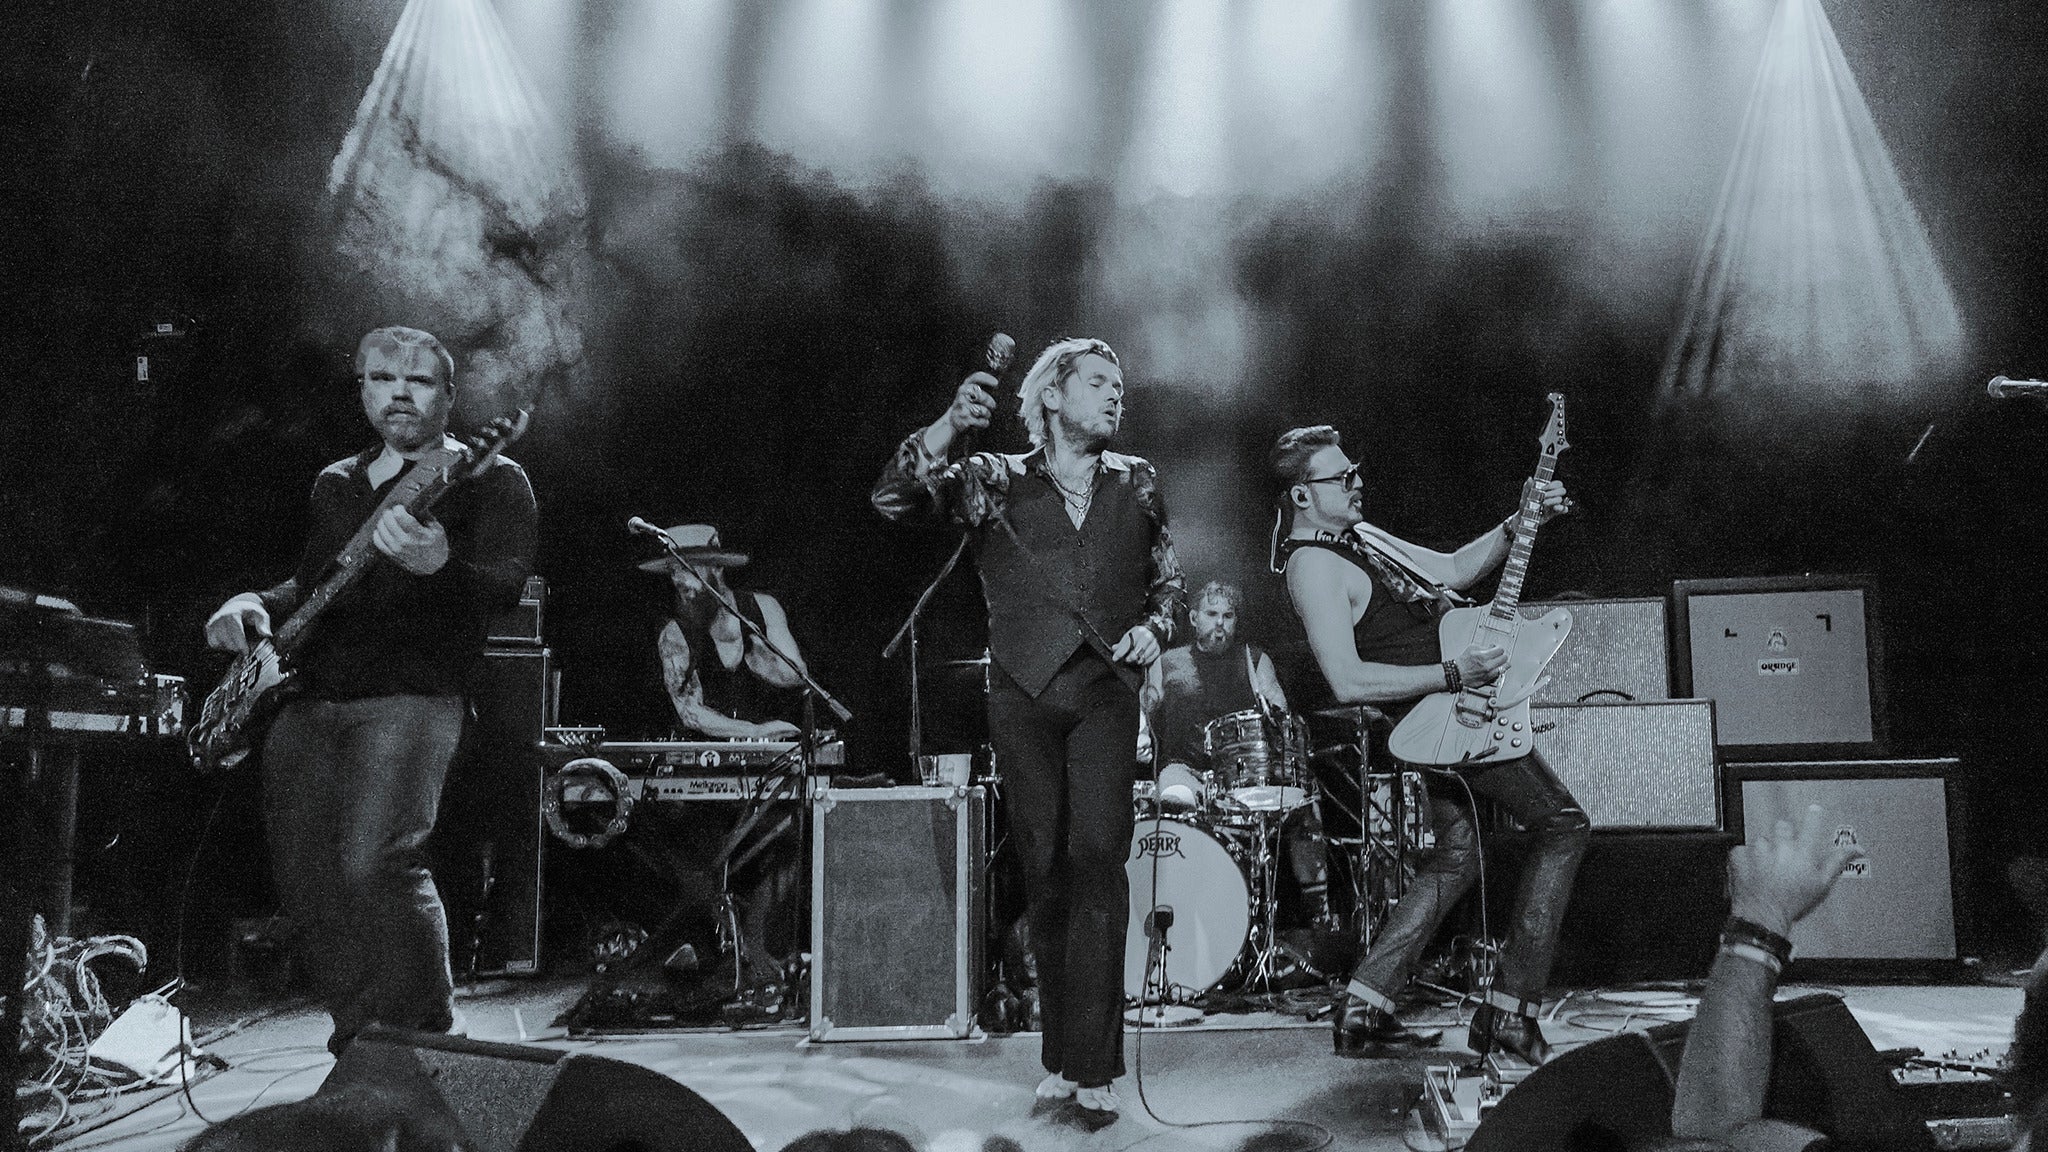 Rival Sons with Dorothy in Dallas promo photo for Official Platinum presale offer code